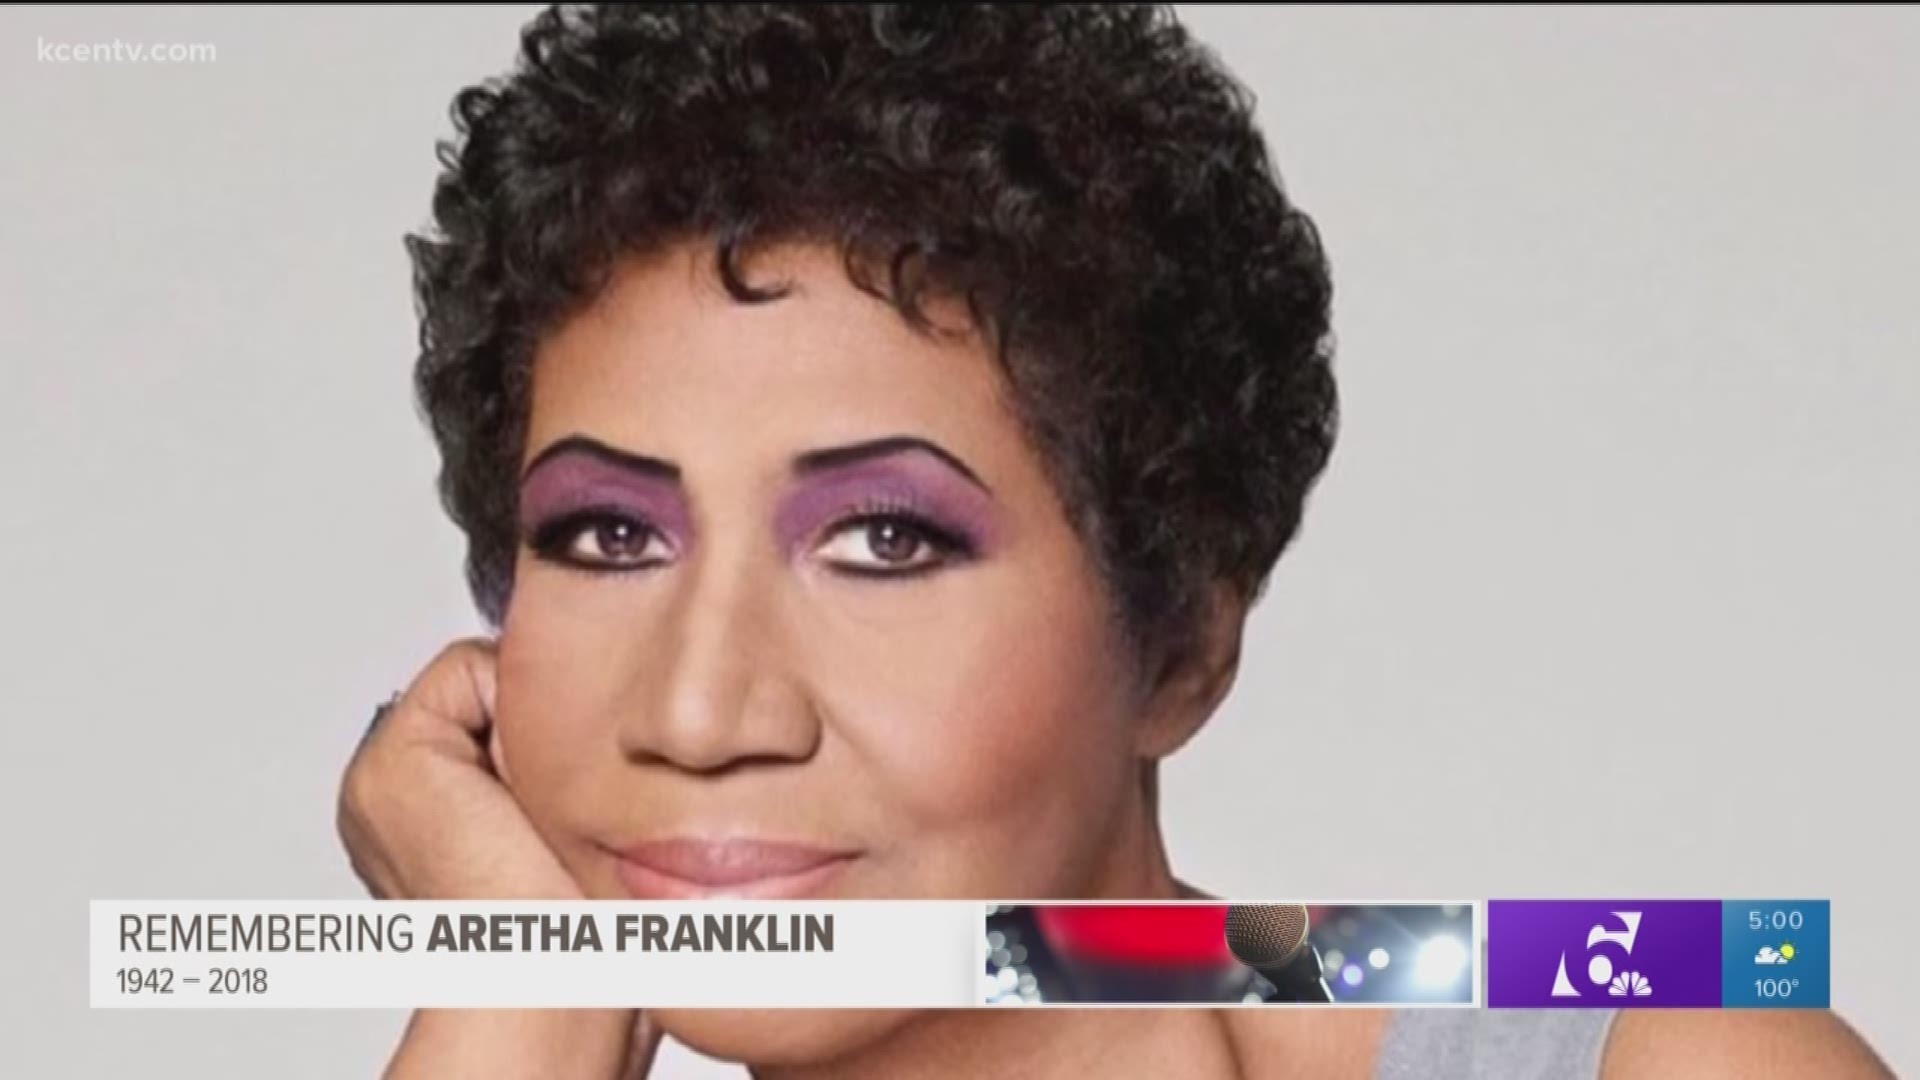 A Waco pastor reflects on Aretha Franklin's legacy